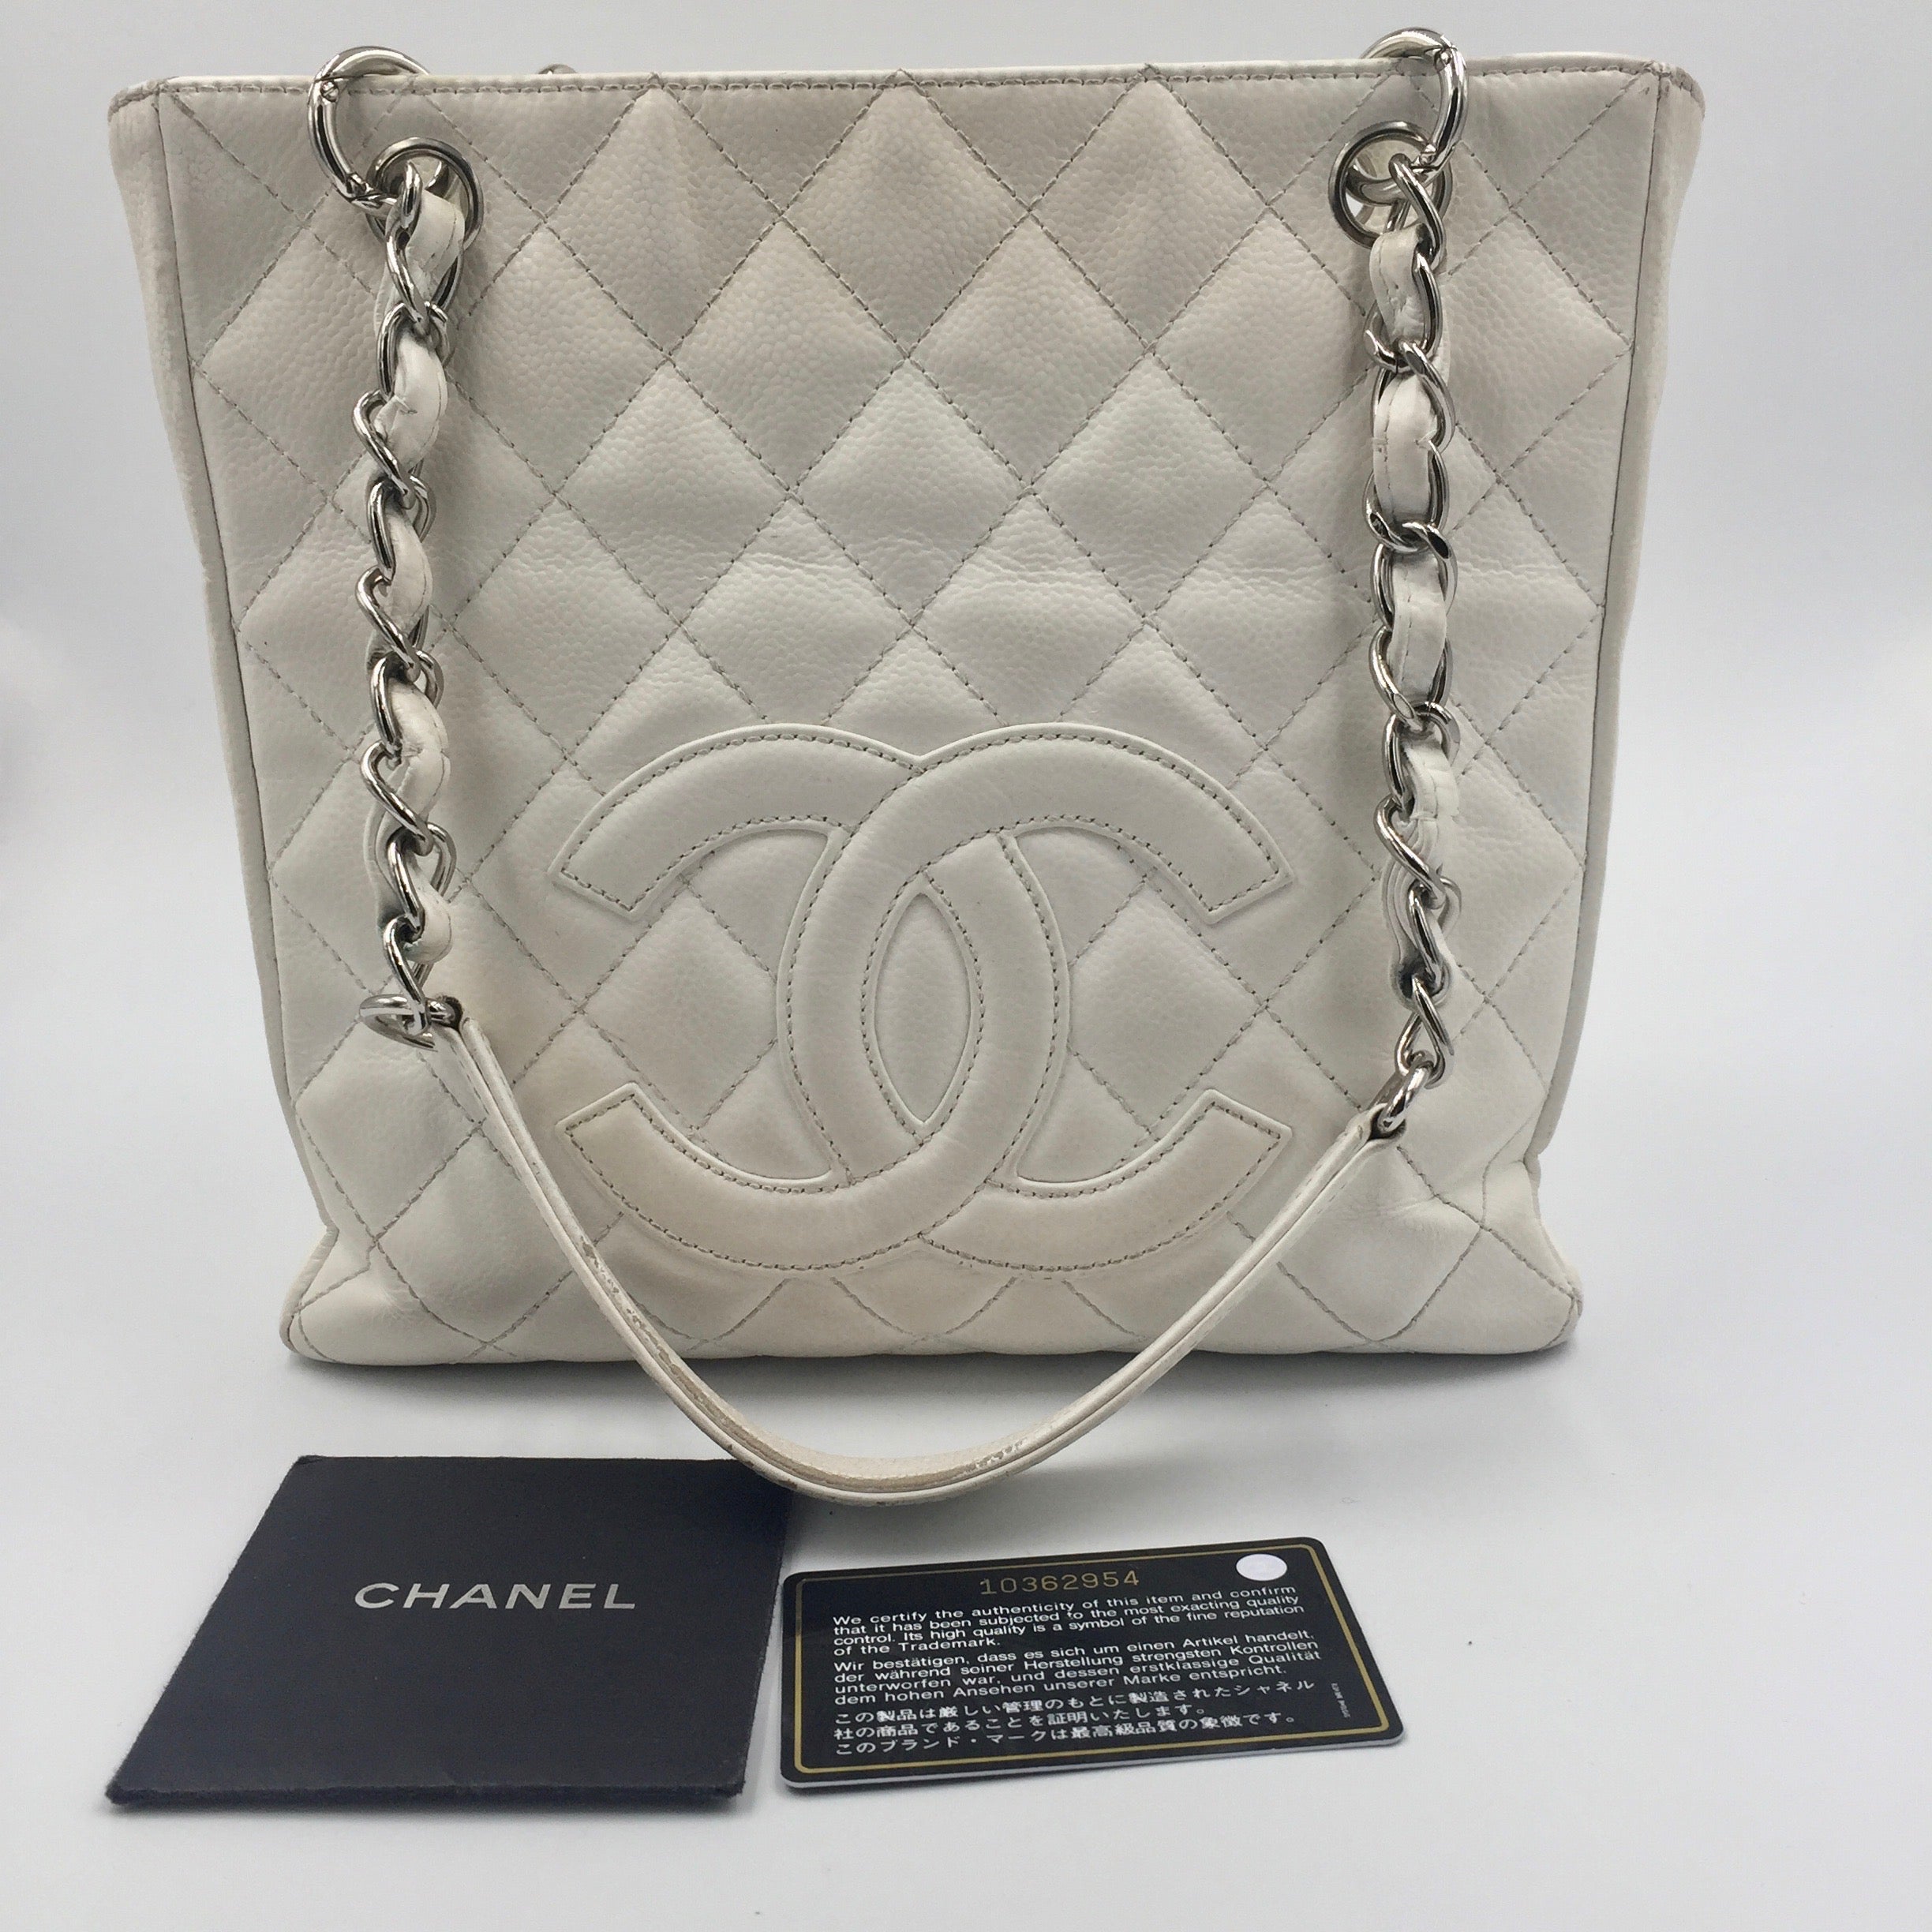 Chanel PST petite timeless shopper tote in caviar – Lady Clara's